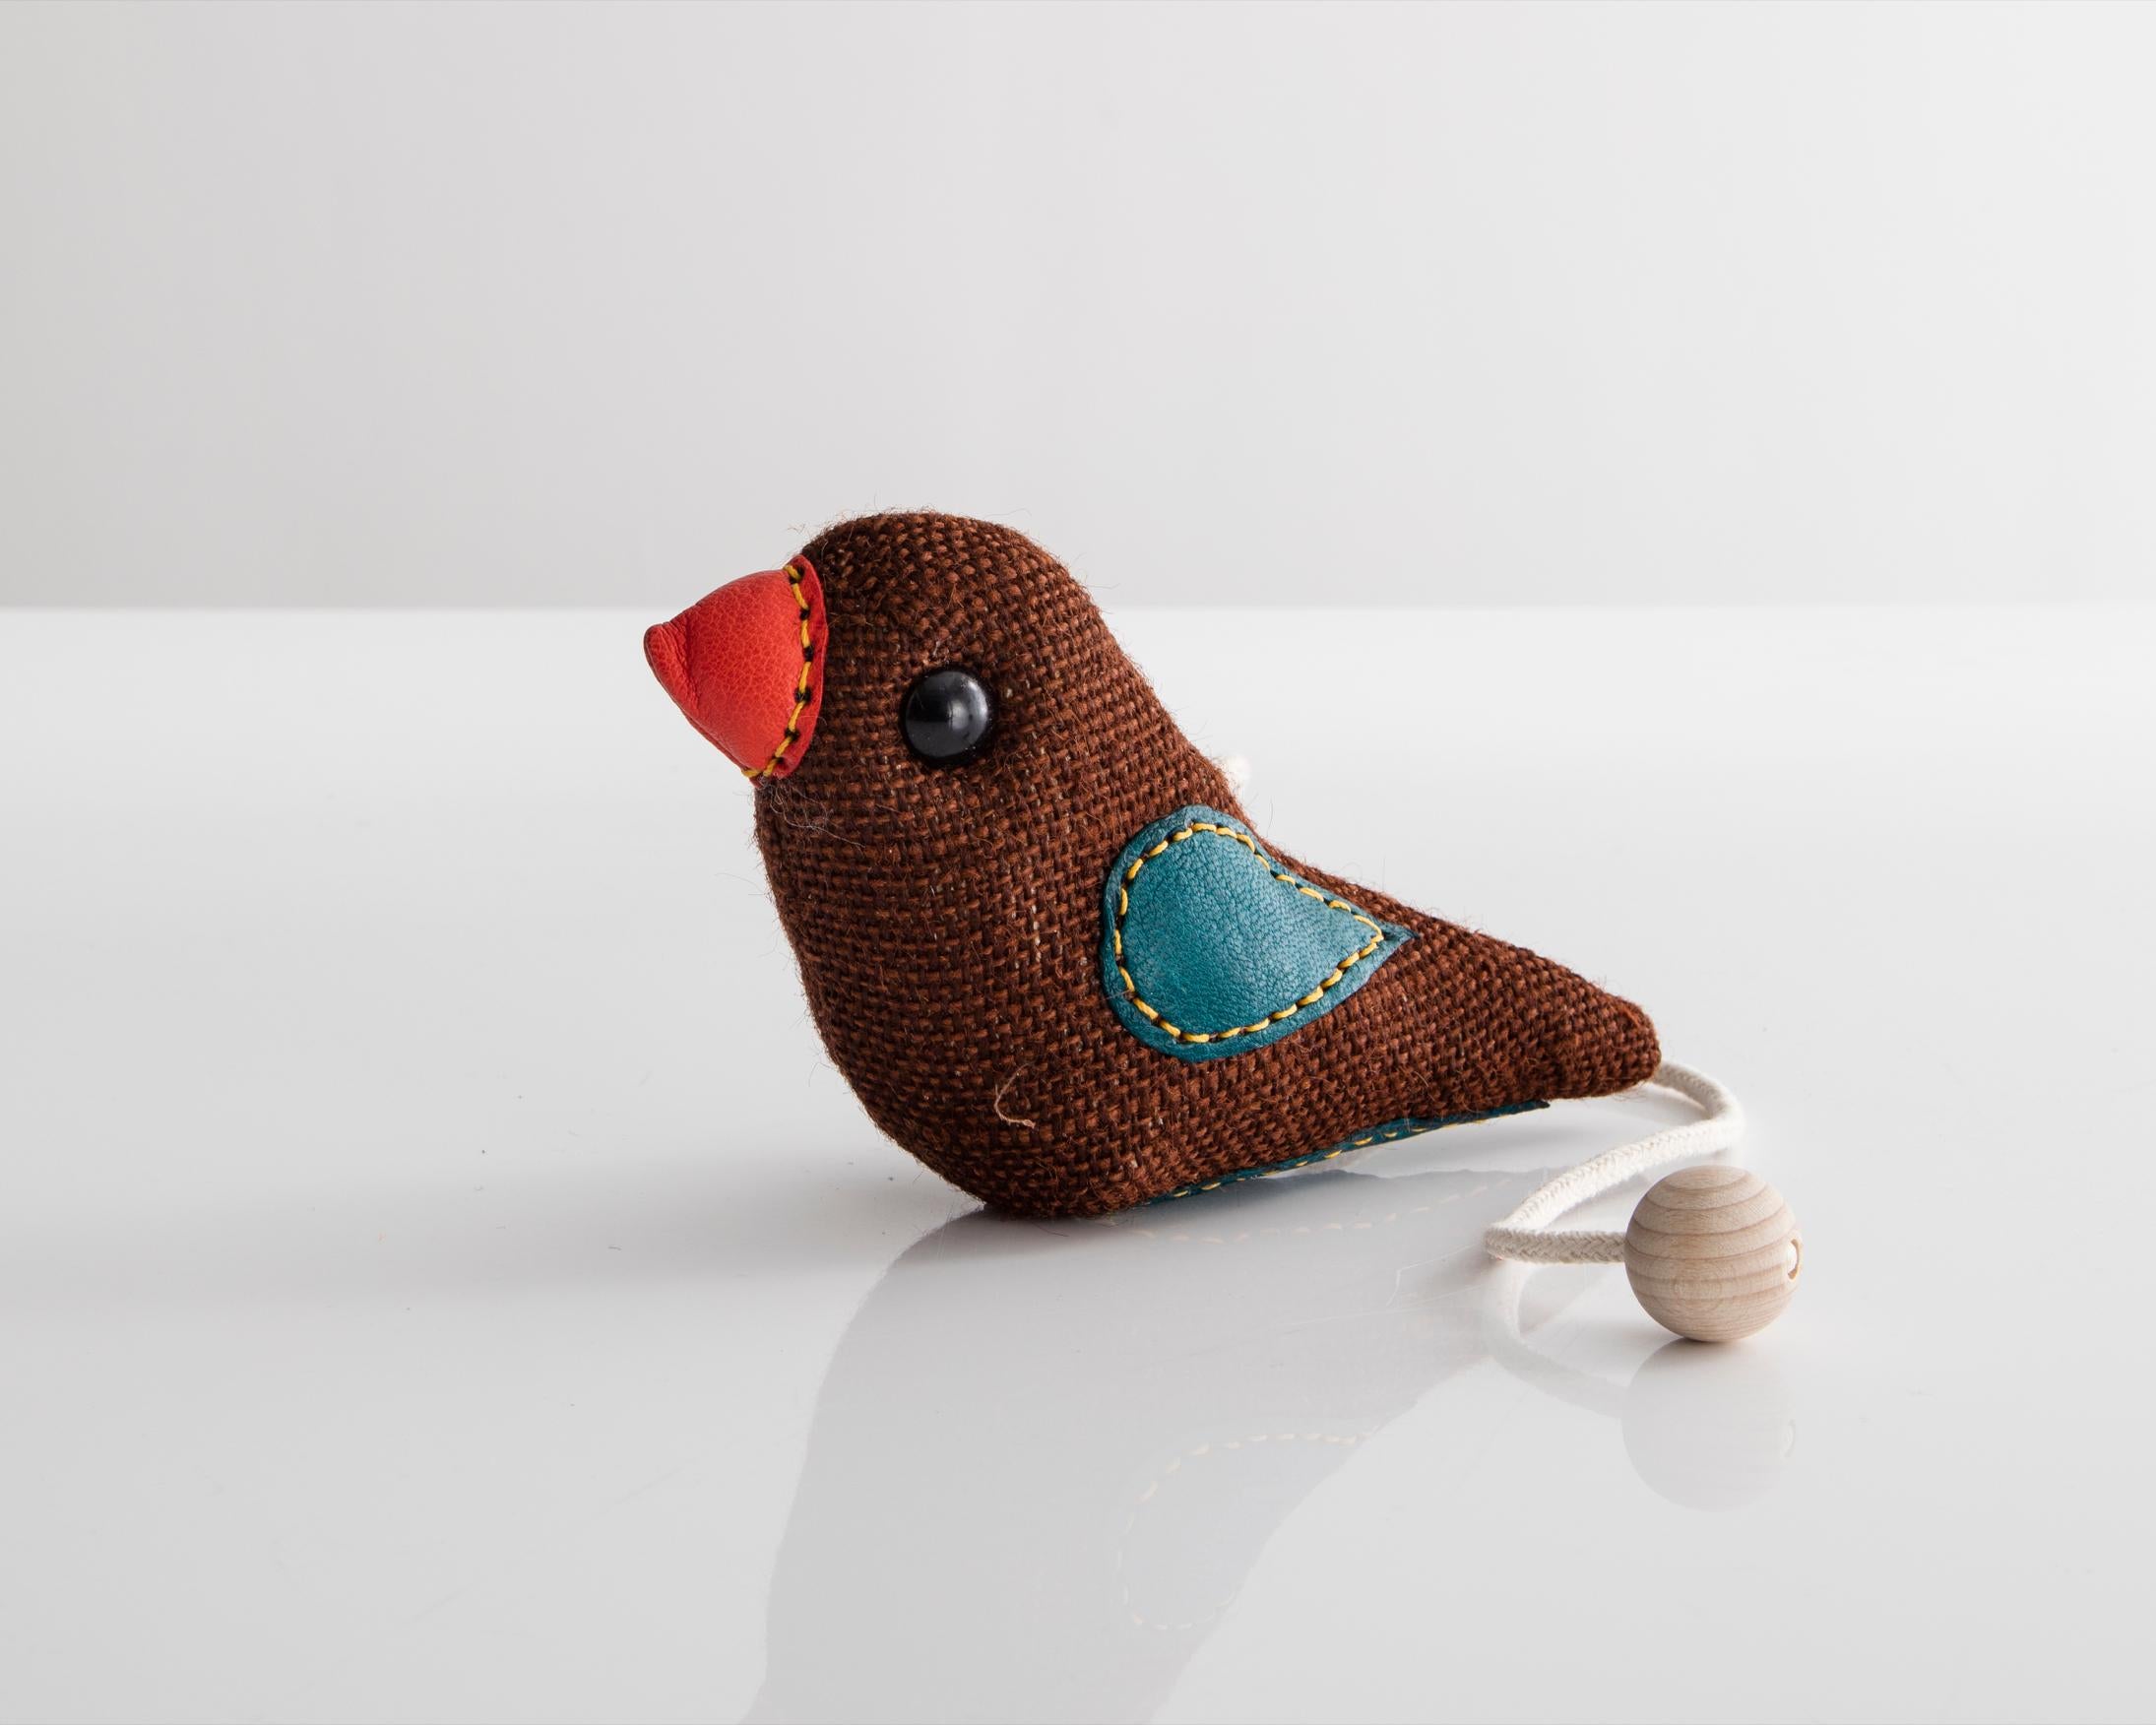 Modern Therapeutic Bird Toy in Brown Jute with Leather by Renate Müller, 1981-1982